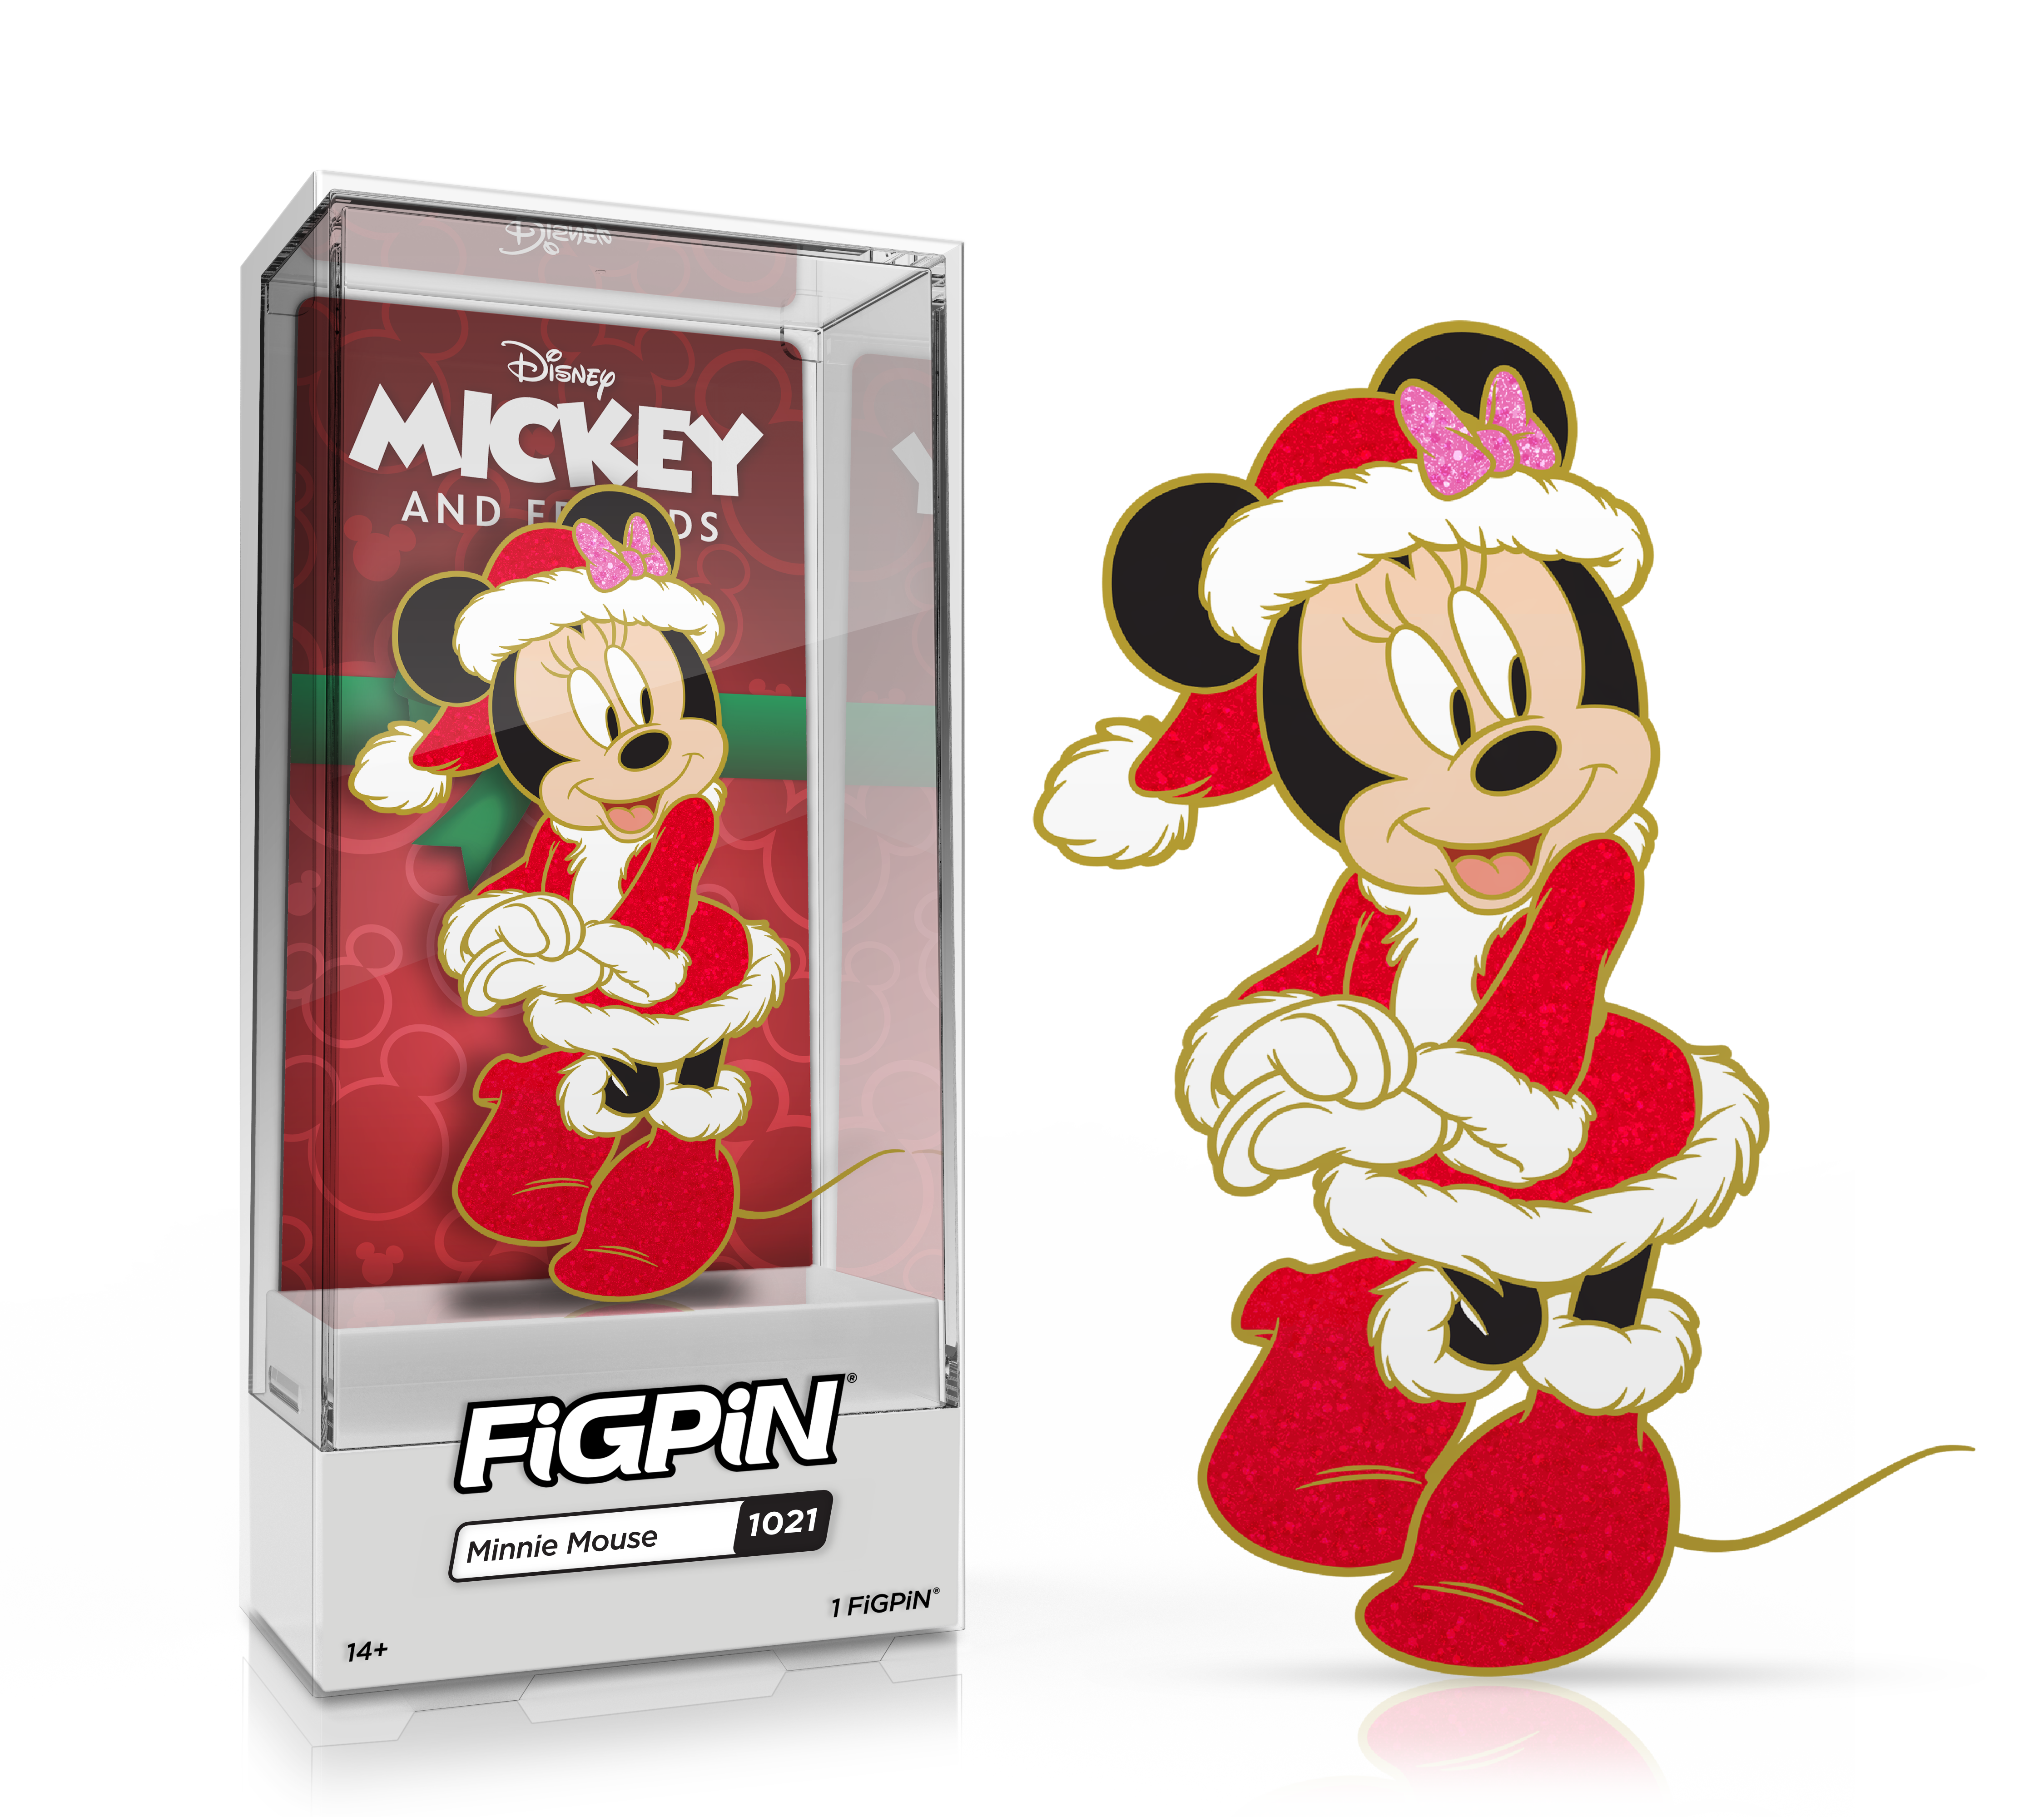 Side by side view of Disney's Minnie Mouse enamel pin in display case and the art render.